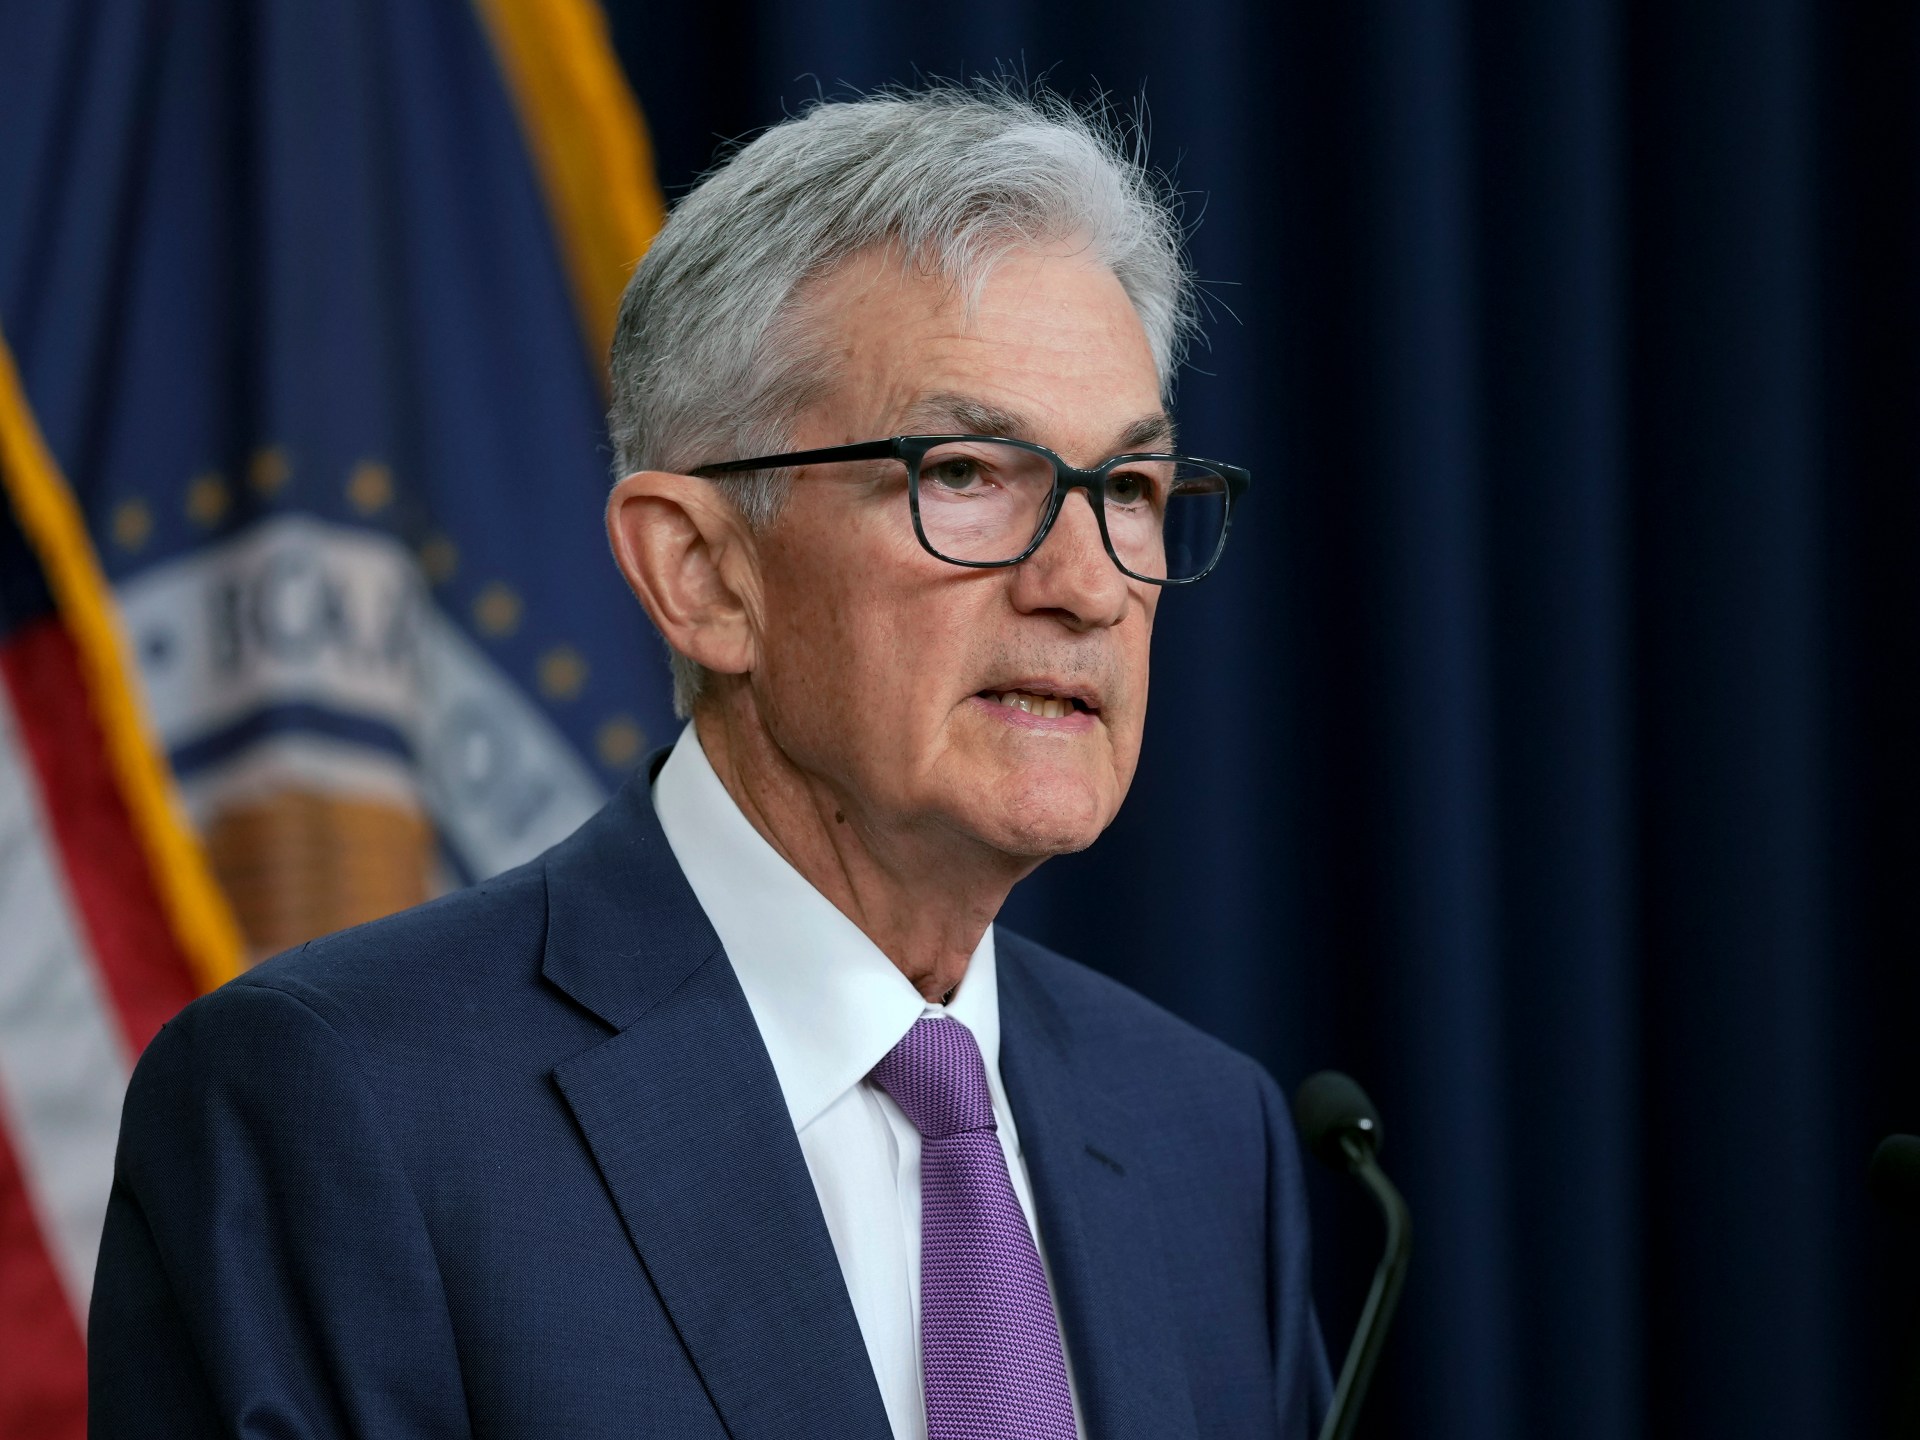 US Federal Reserve maintains high interest rates due to persistent inflation